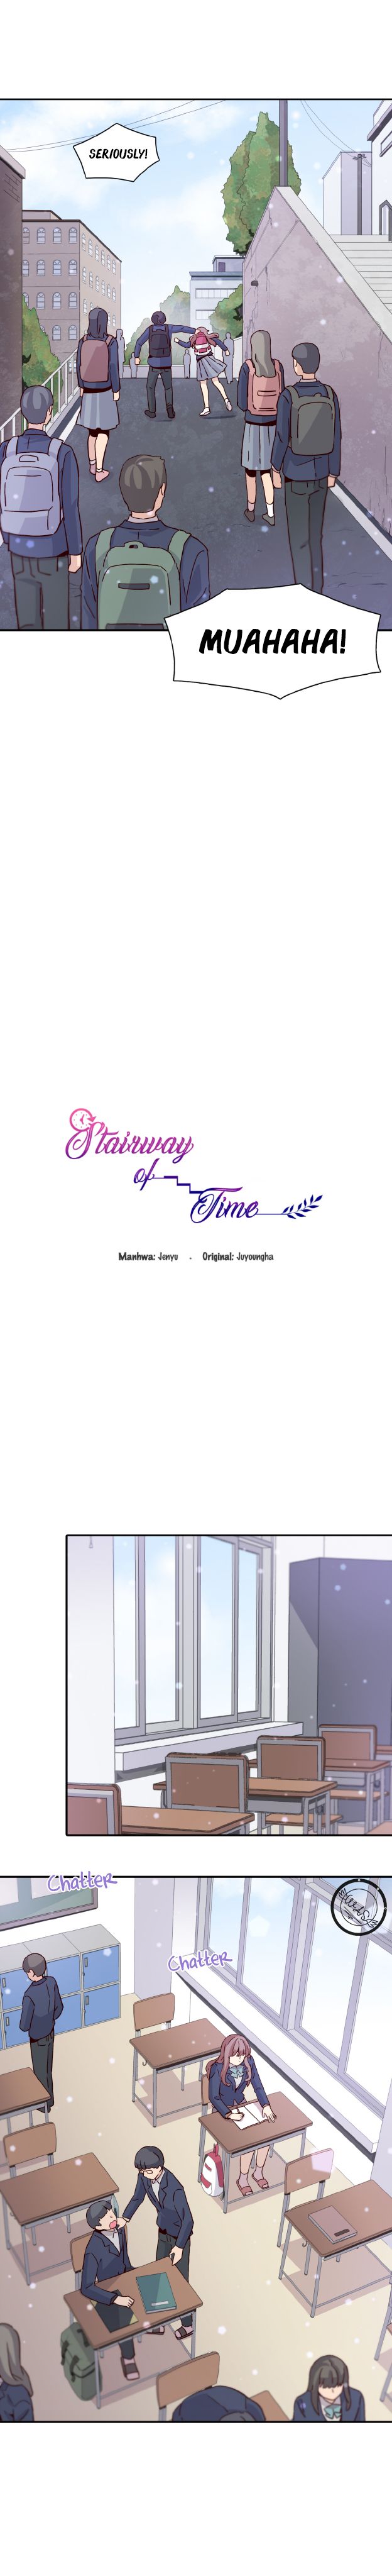 Stairway Of Time - Page 2